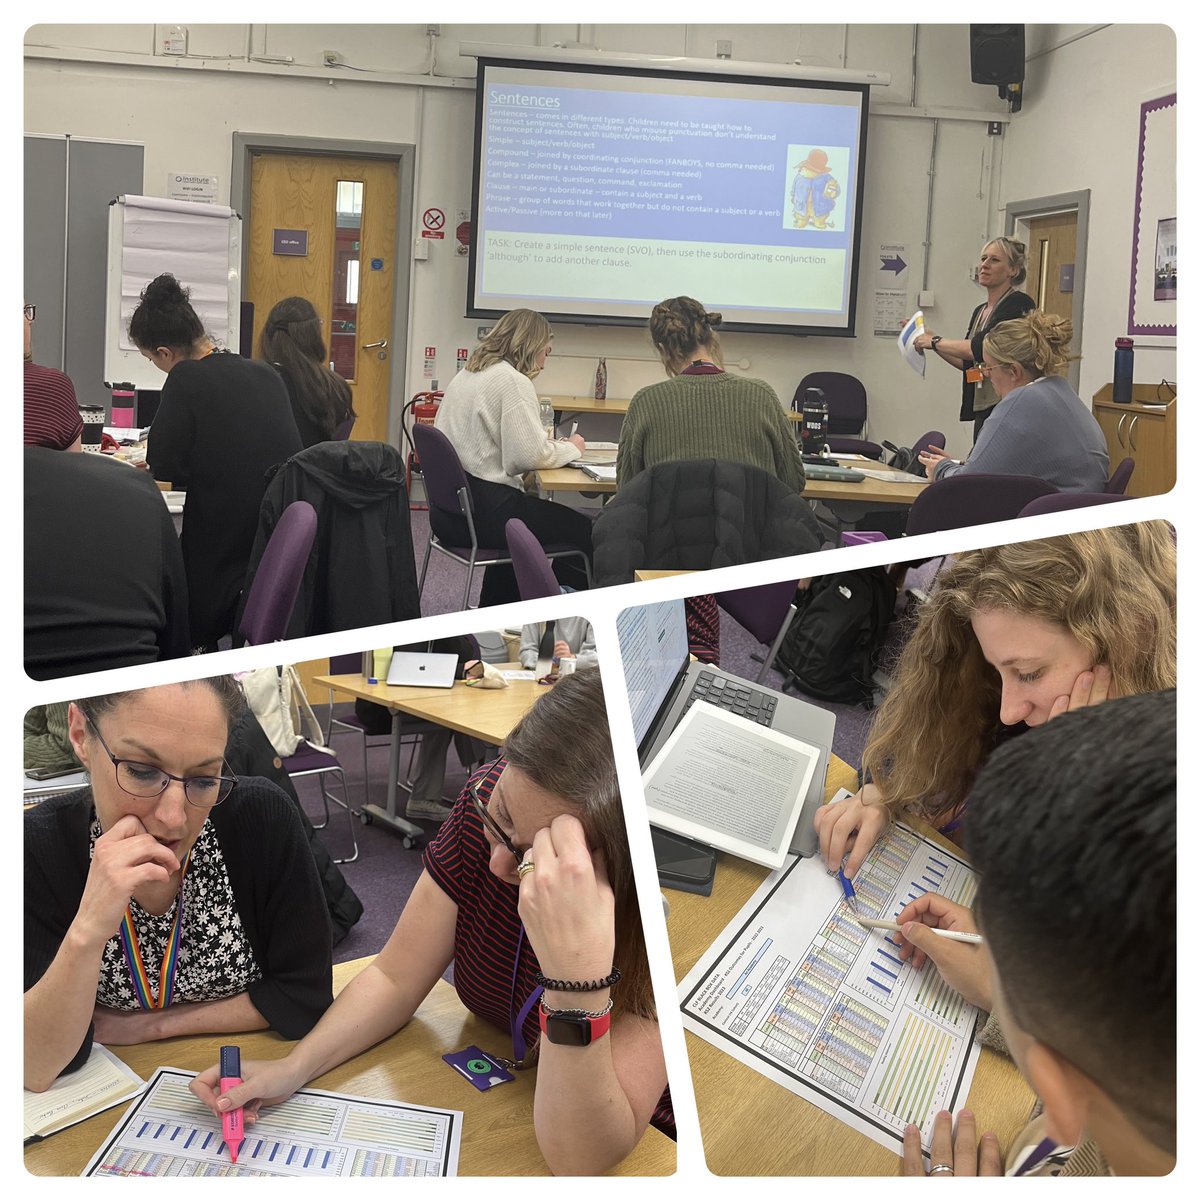 Thank you to Claire from @Cabotfederation data team for her input this morning helping us understand black box data and Christy from @MinervaCLF for developing our SPaG knowledge this afternoon @CLF_Institute